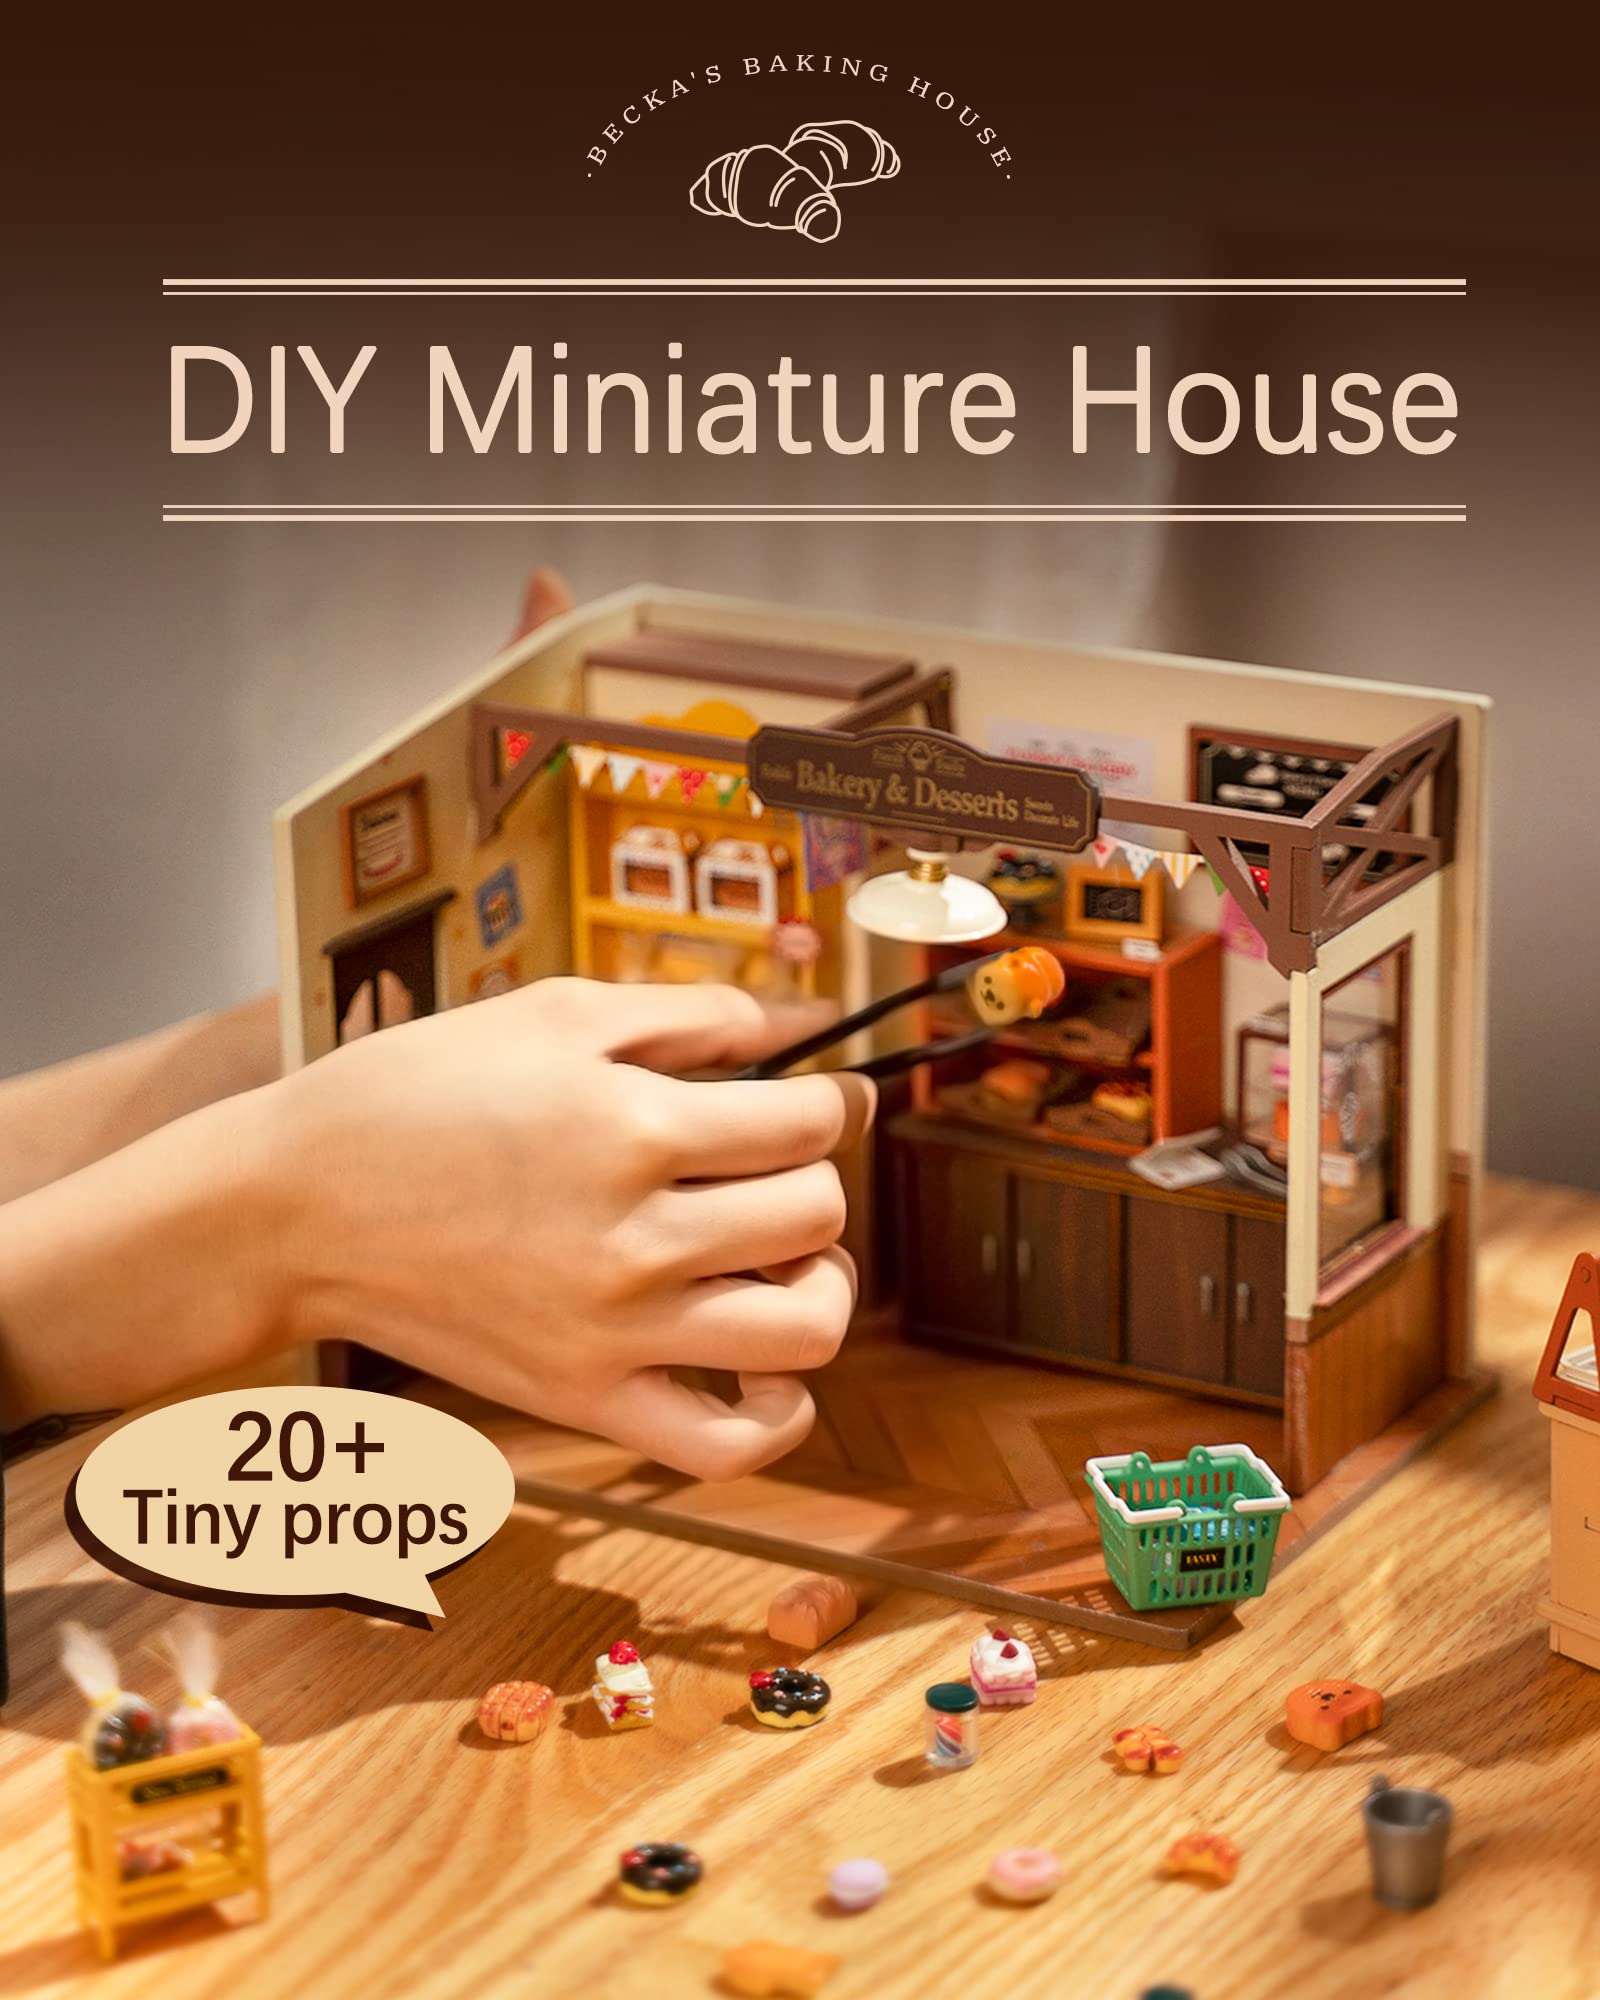 Rolife Miniature House Kit for Beginners-1:20 DIY Miniature Dollhouse Kit with LED Lights-Tiny House Crafts for Adults-Birthday Gifts Hobbies for Women and Men